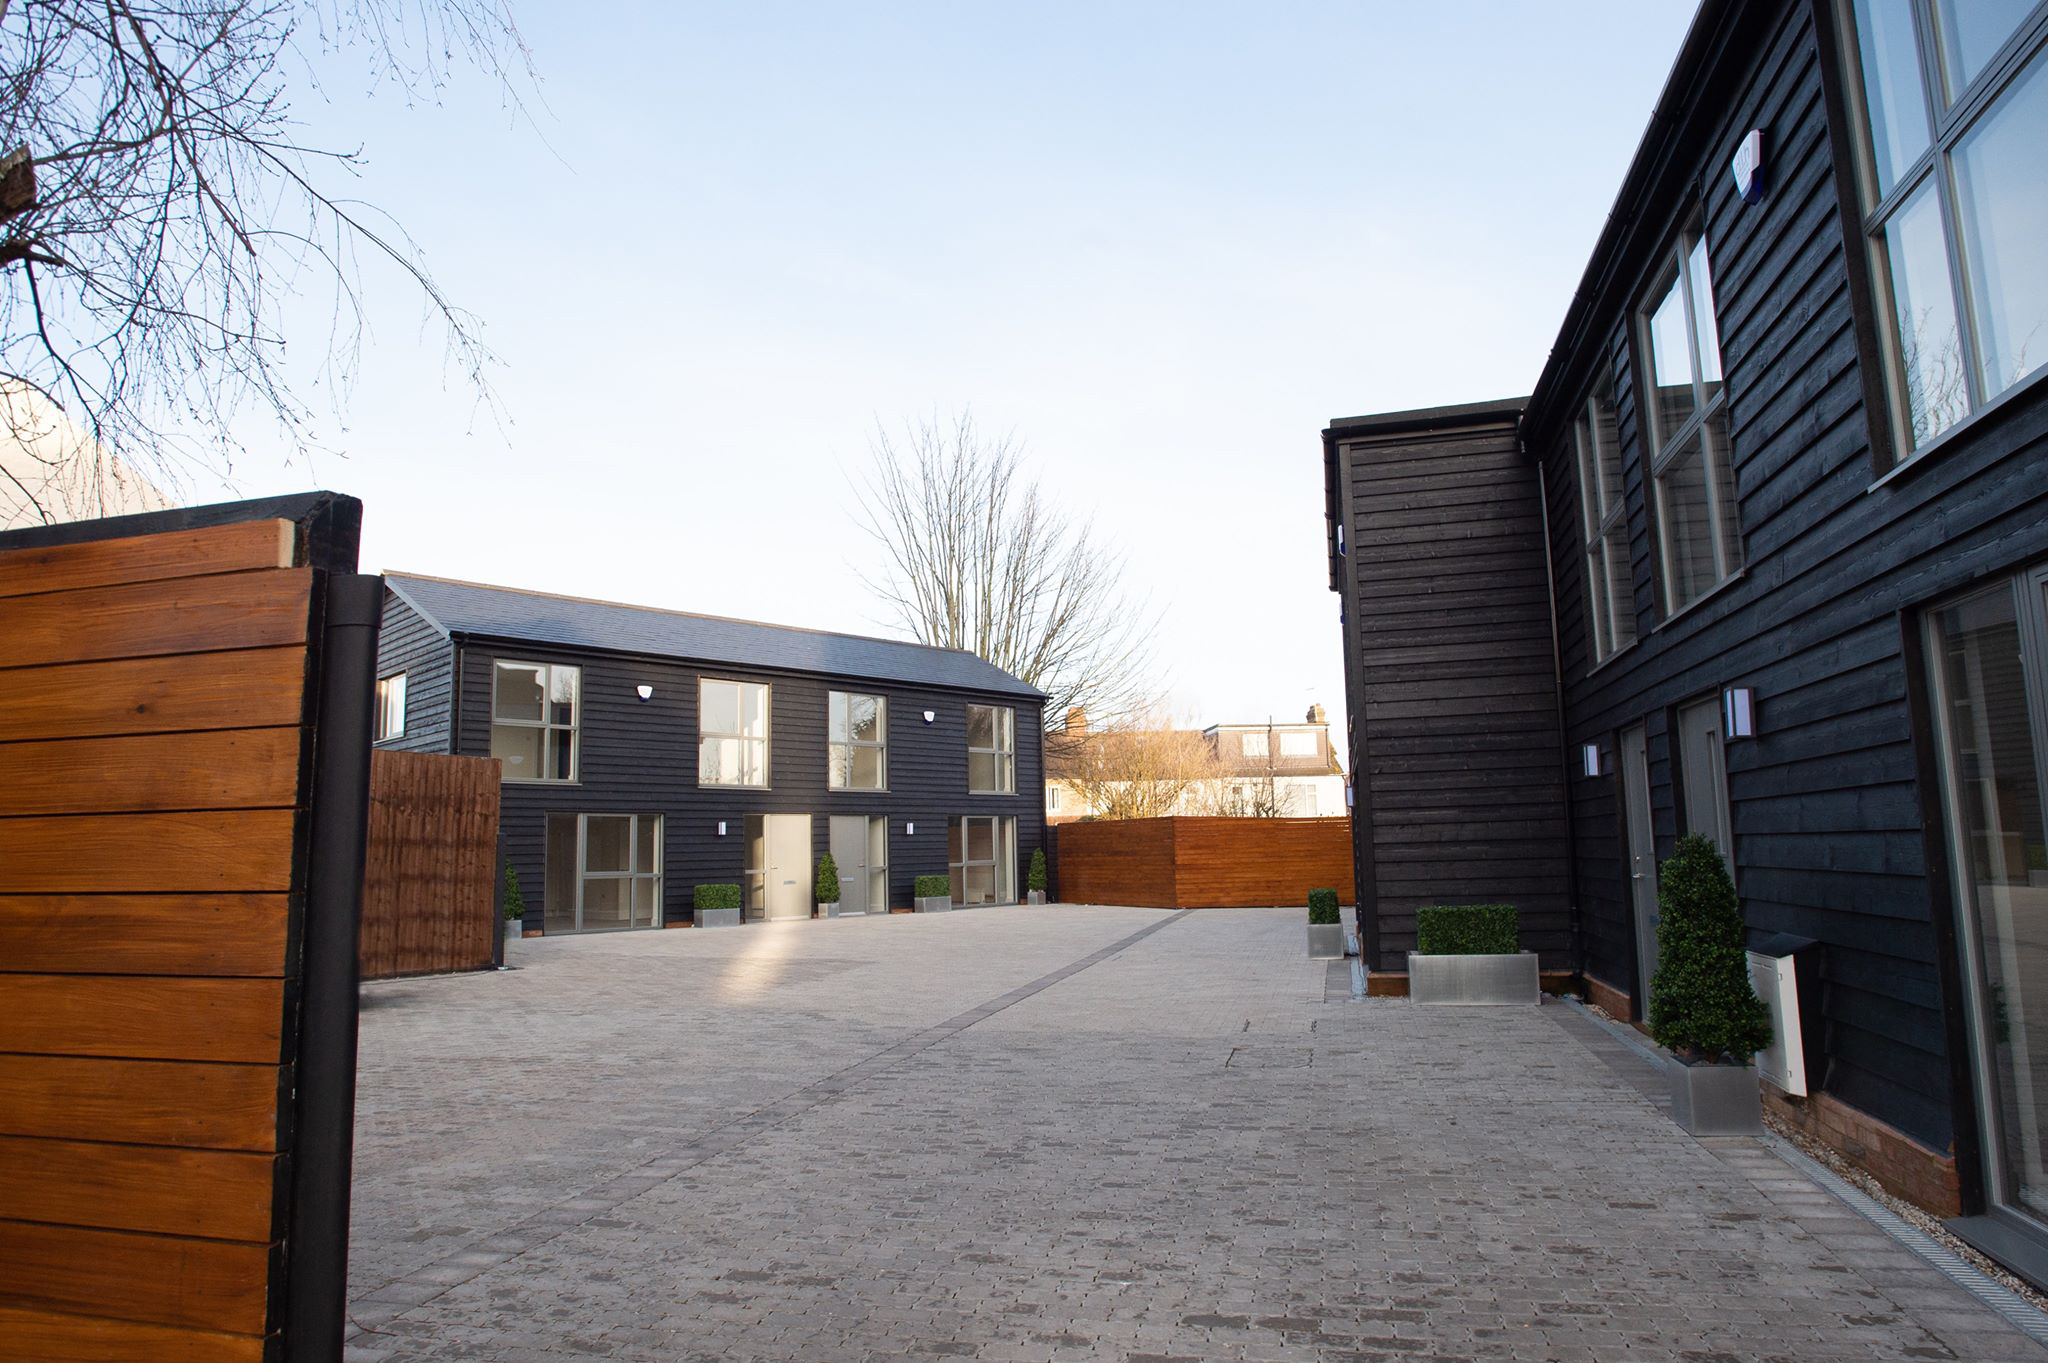 Two Barn Conversions in Chase Side North London